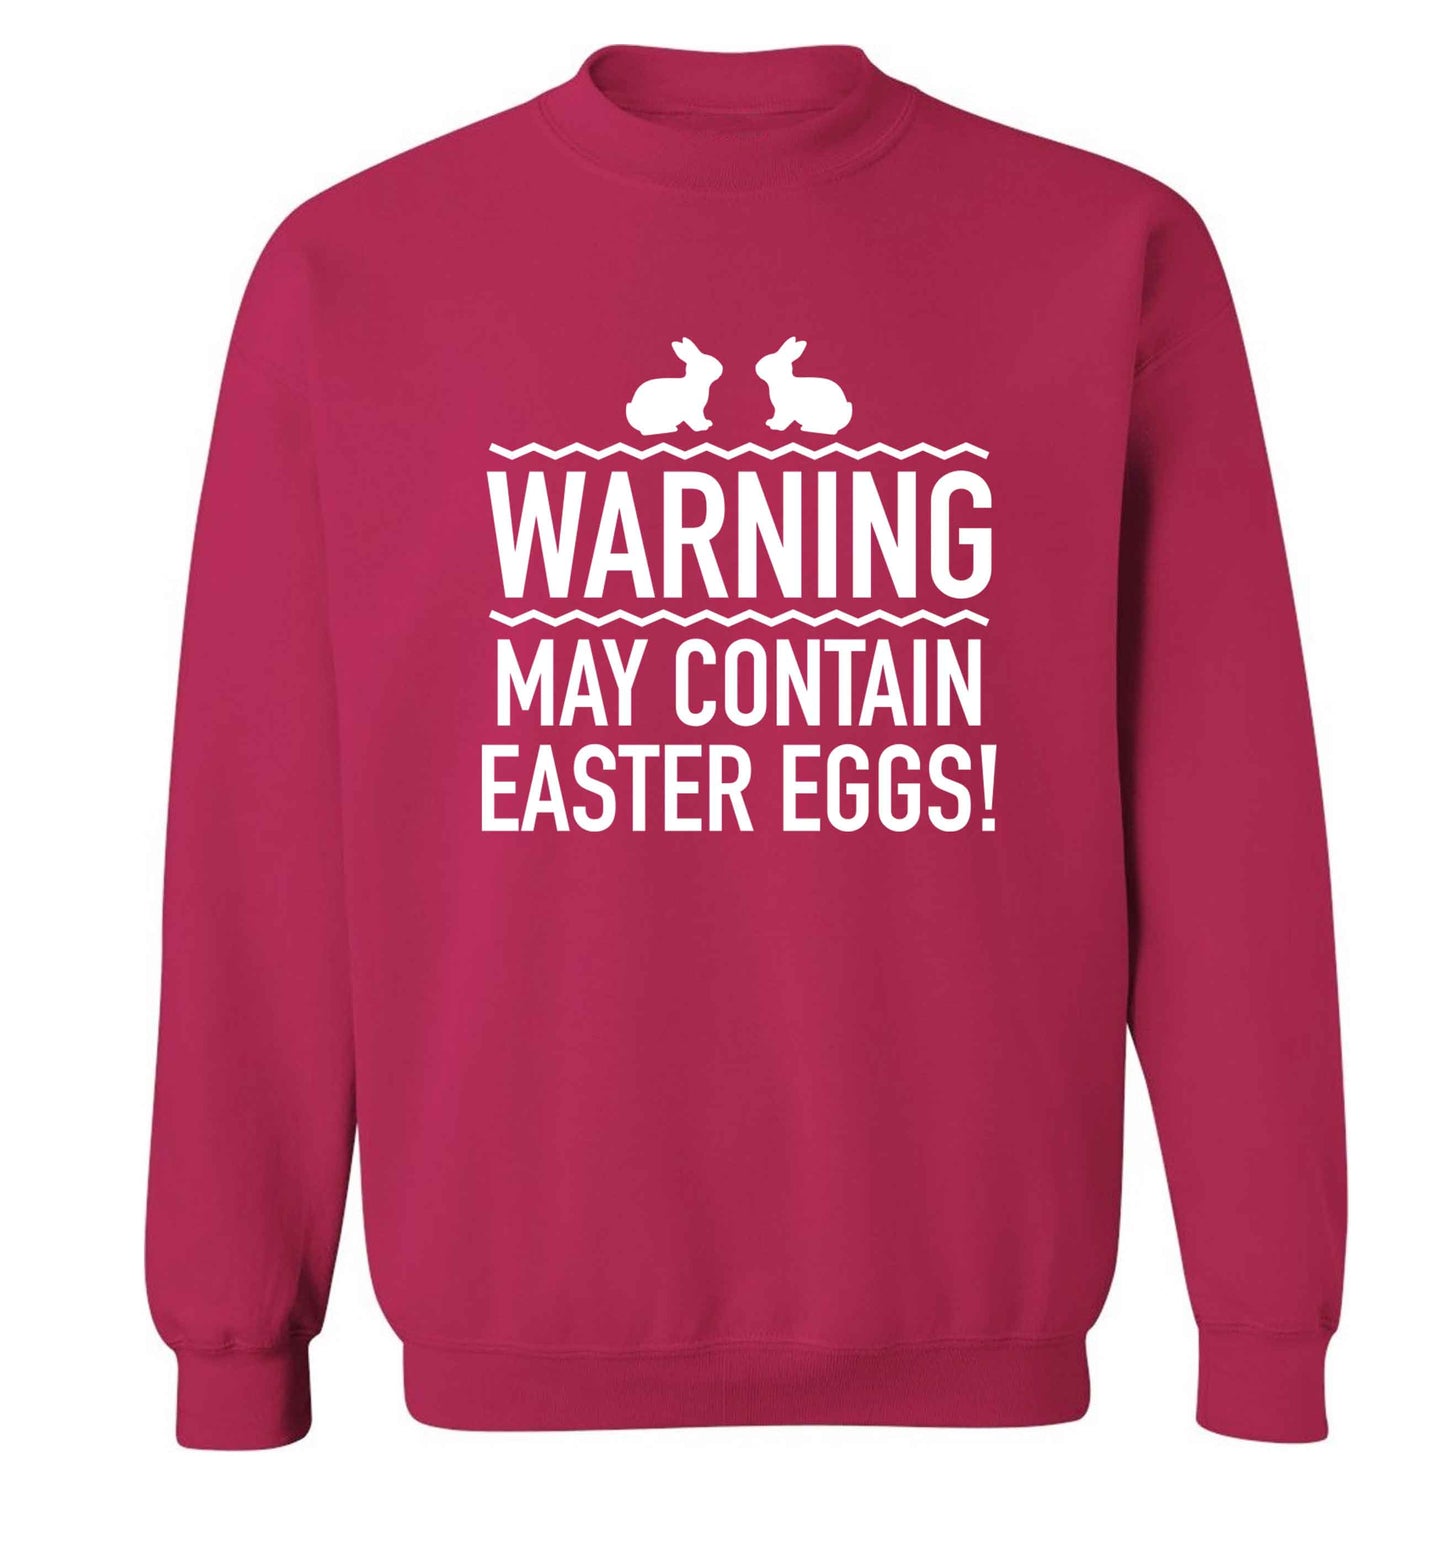 Warning may contain Easter eggs adult's unisex pink sweater 2XL